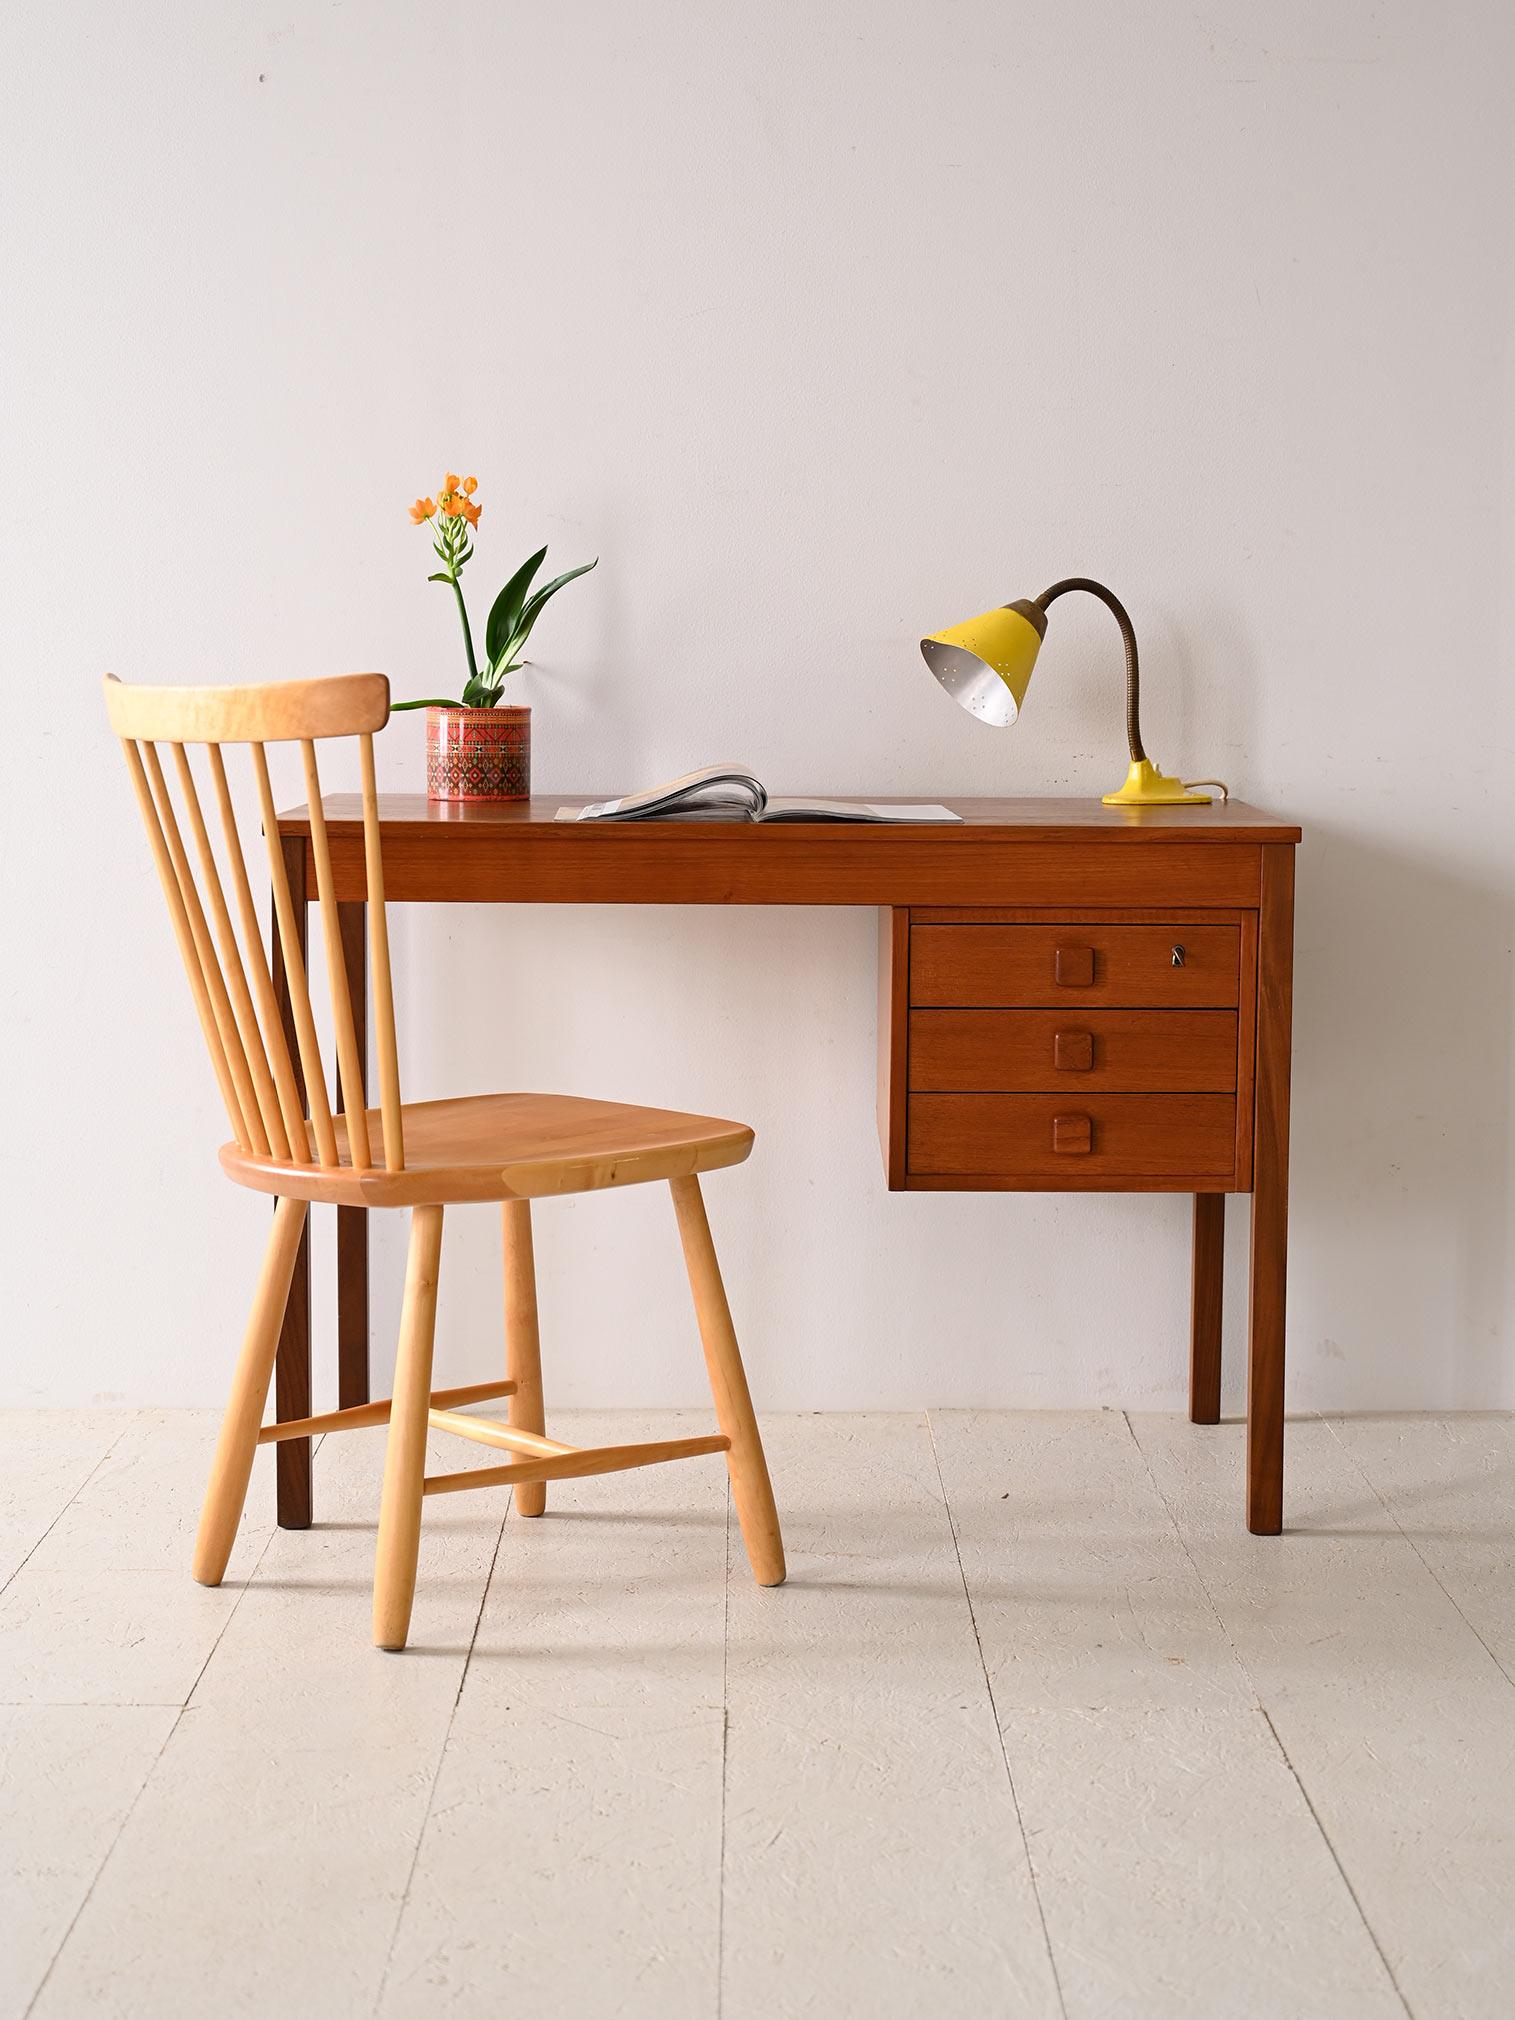 Vintage original 1960s teak desk. This charming piece of furniture embodies the simplicity and practicality typical of Scandinavian design. The compact structure and minimal lines give the desk a light, modern look that is perfect for smaller